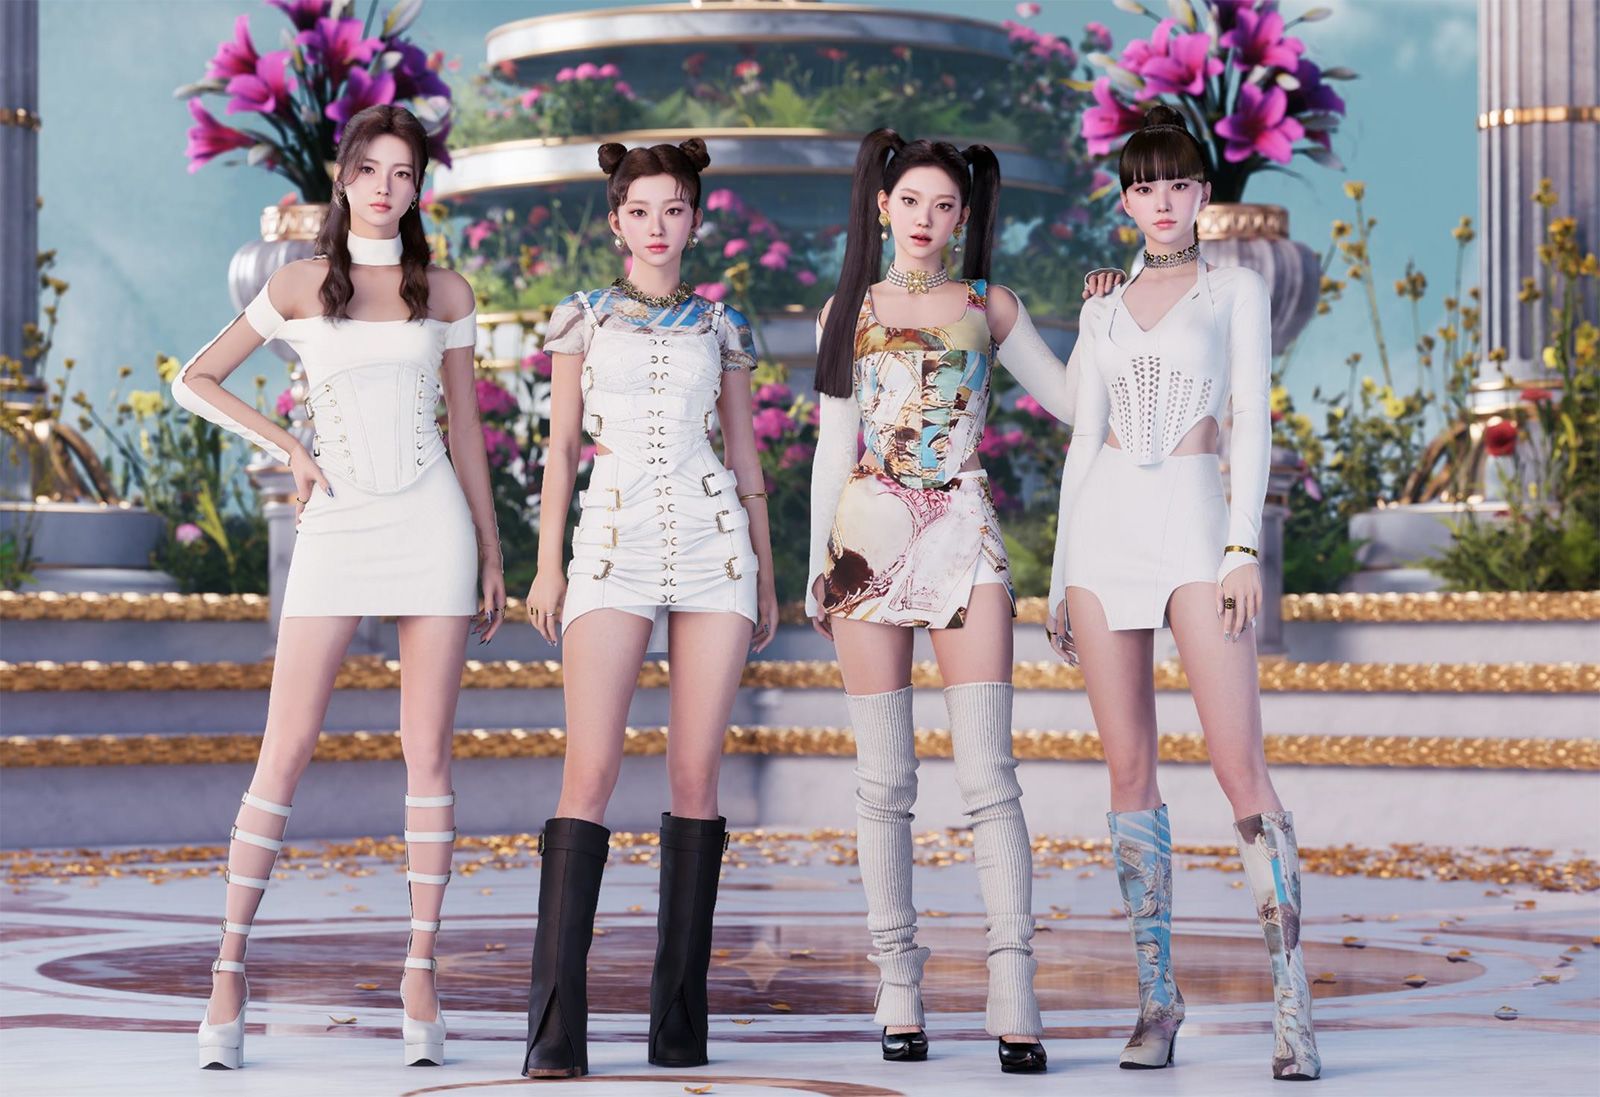 This is MAVE: the K-pop avatar group with millions of views, Culture